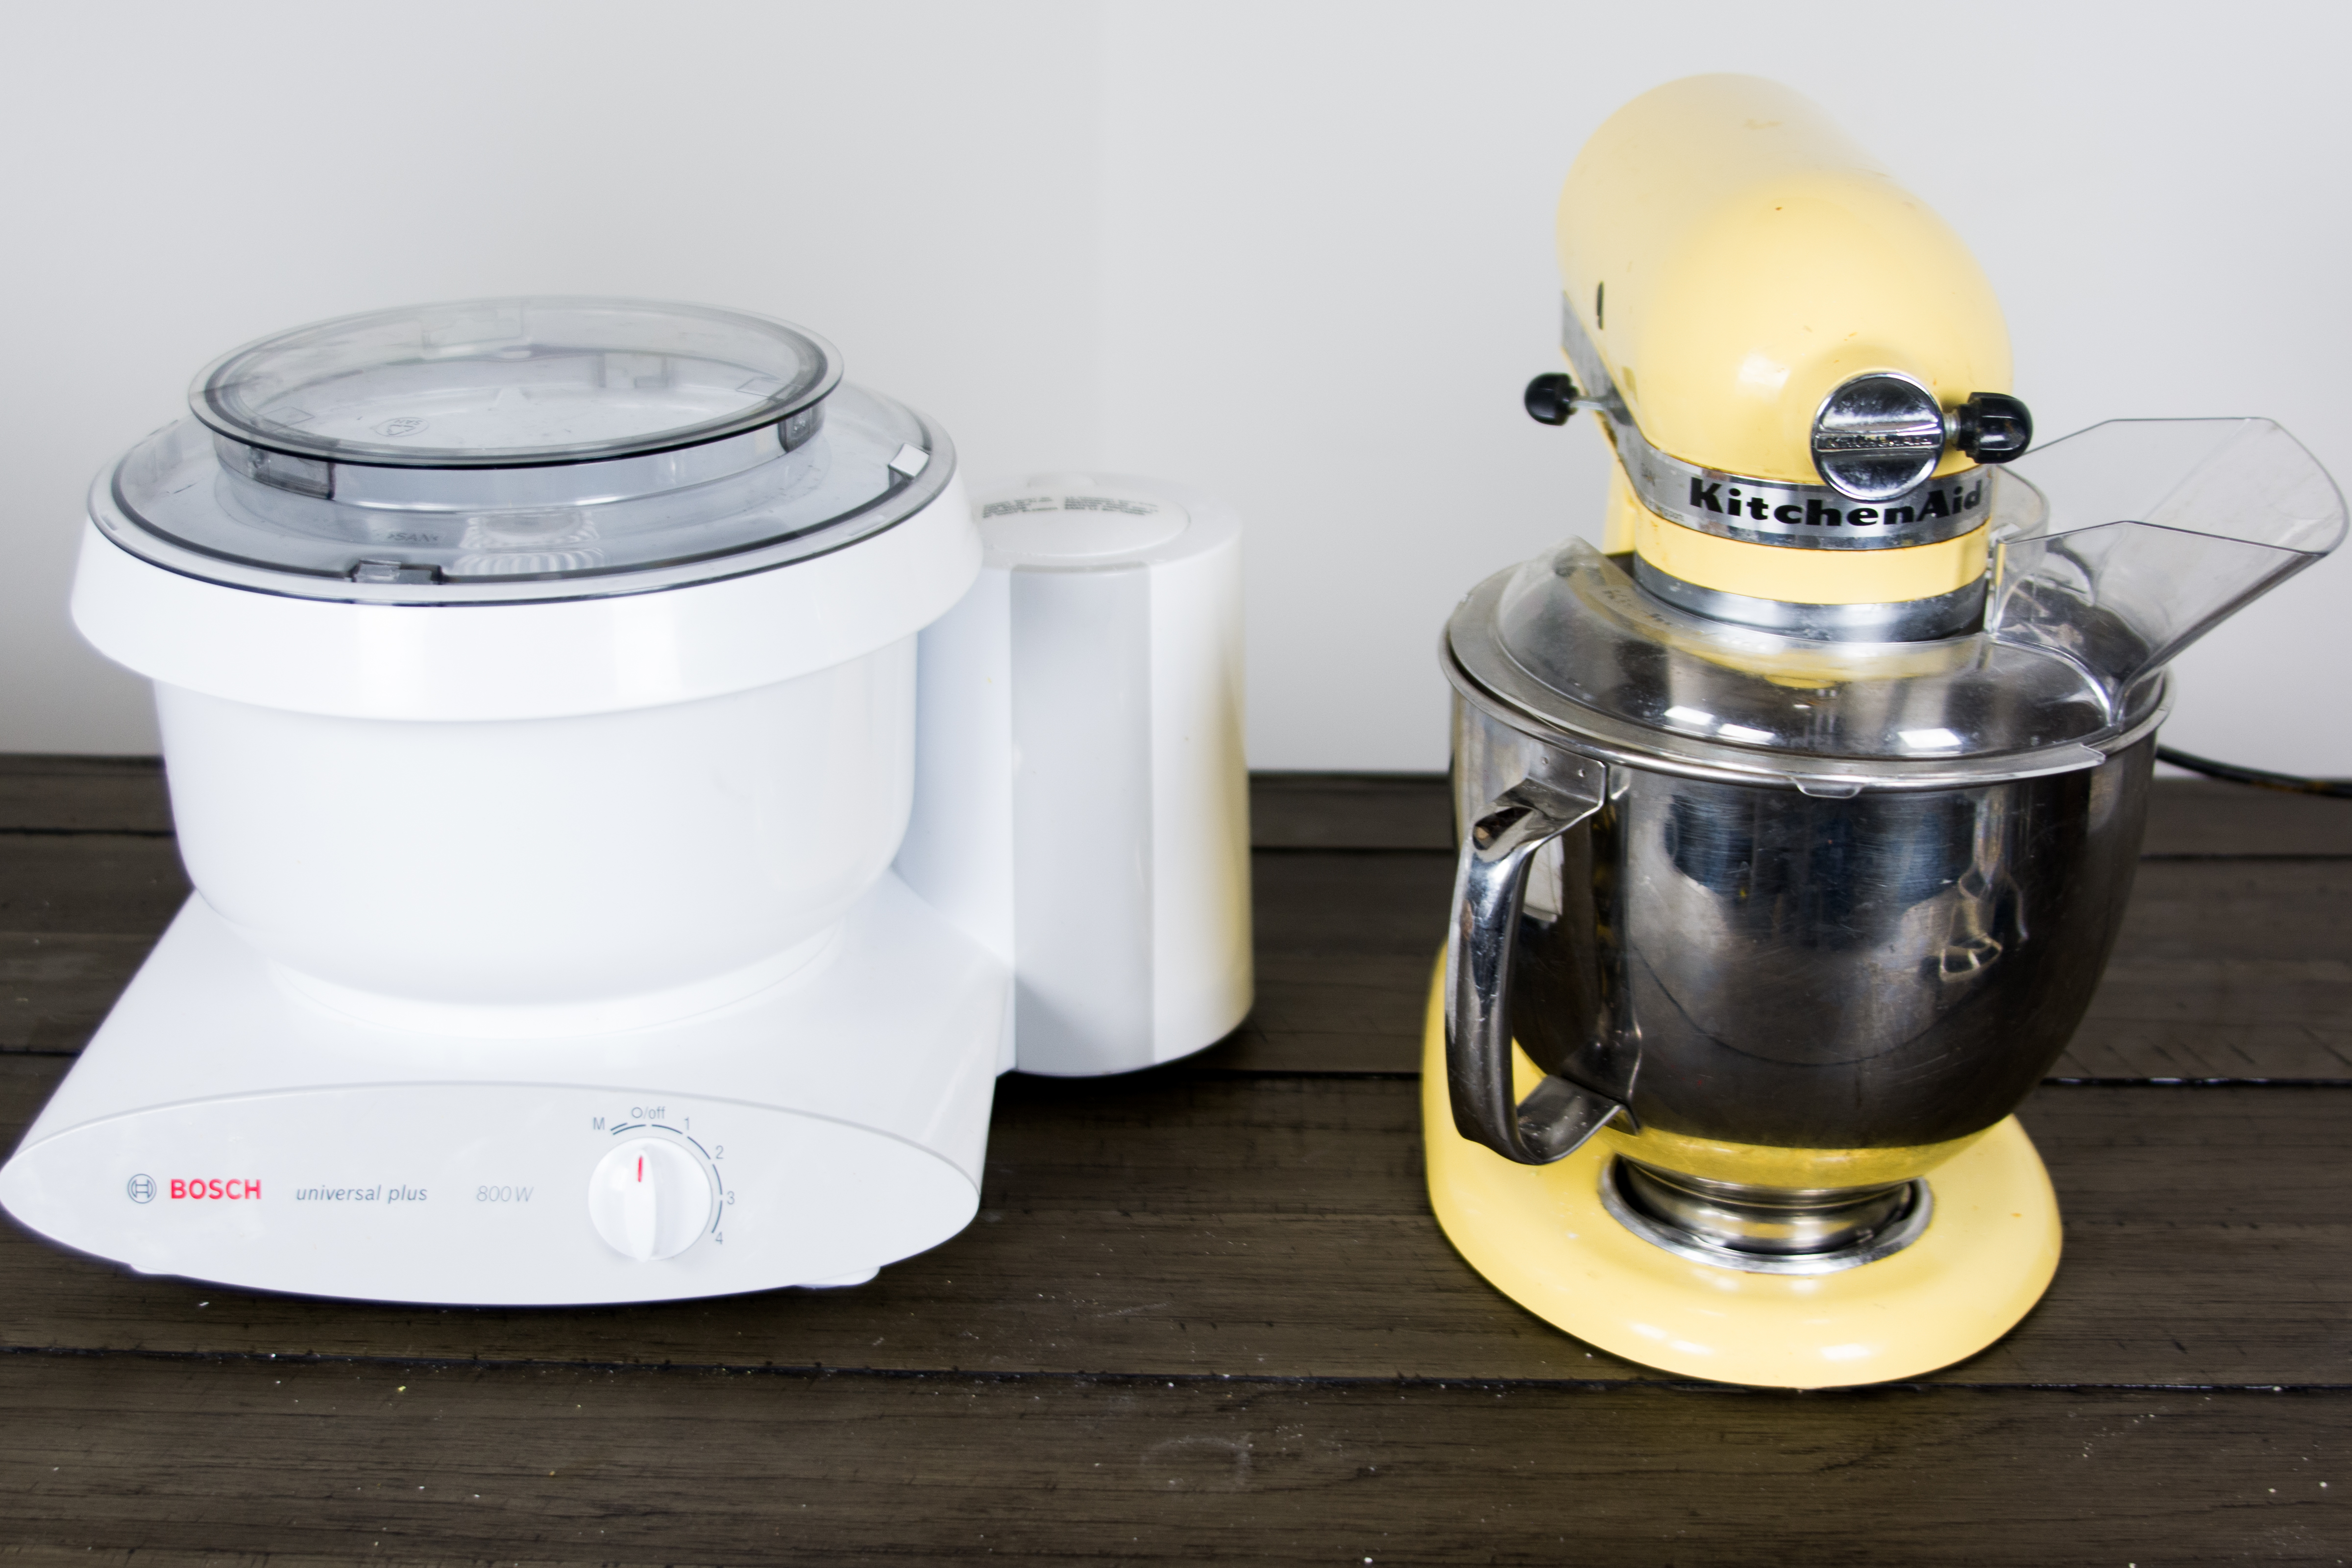 The Ultimate Guide to the Bosch Universal Plus Mixer + Review